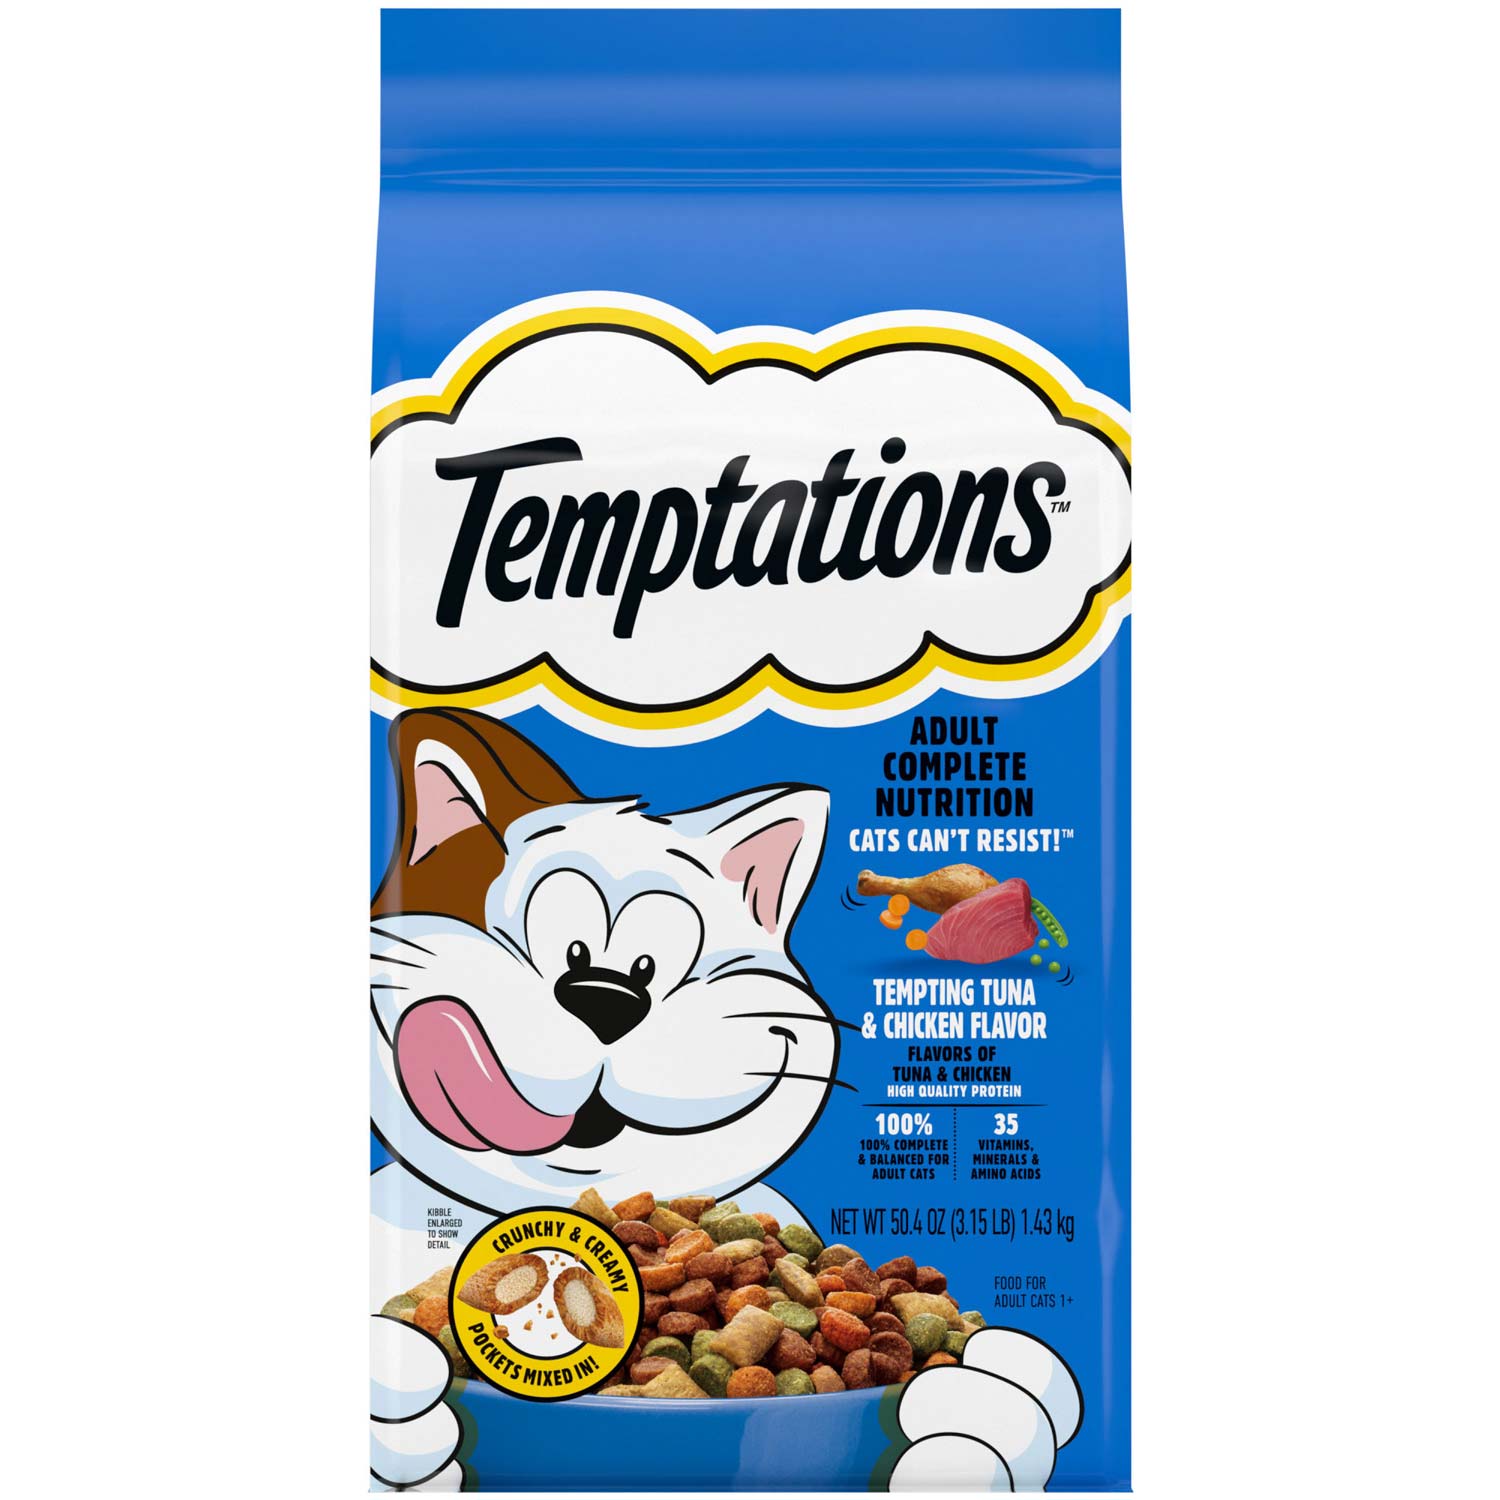 Temptations Tempting Tuna & Chicken Flavor Adult Dry Cat Food, 3.15 Pounds